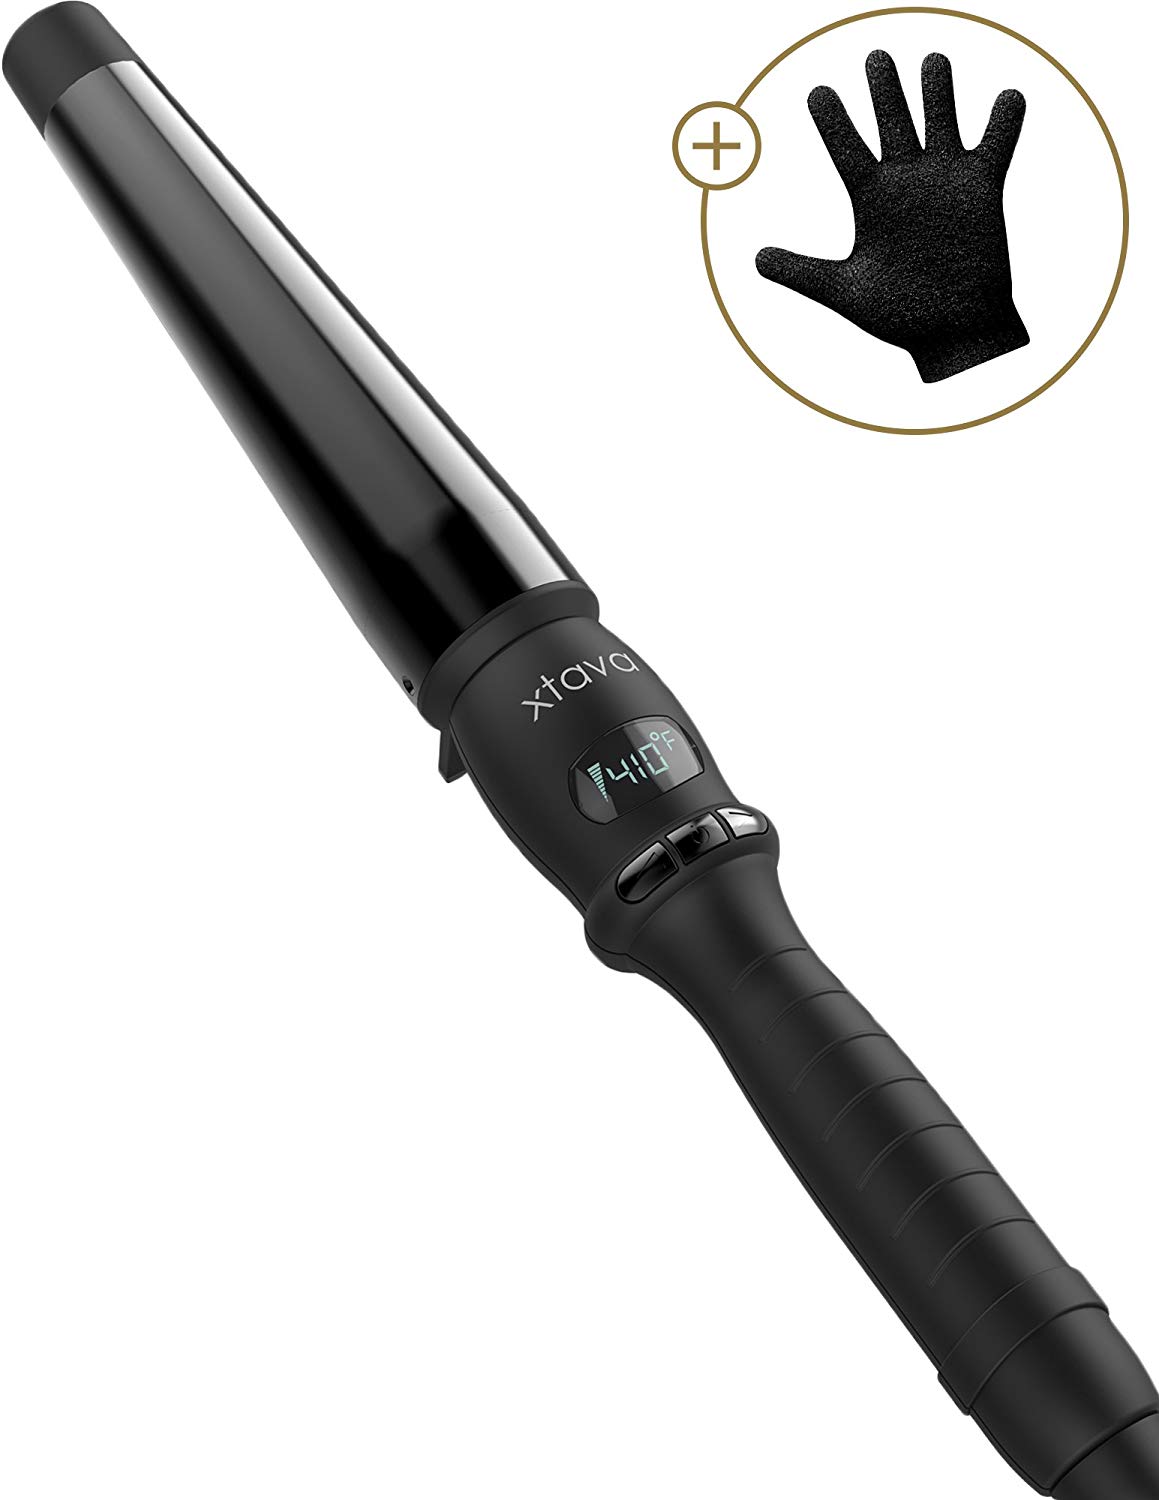 Xtava Twist Curl Curling Wand - 1 to 1.5 Inch Professional Hair Wand